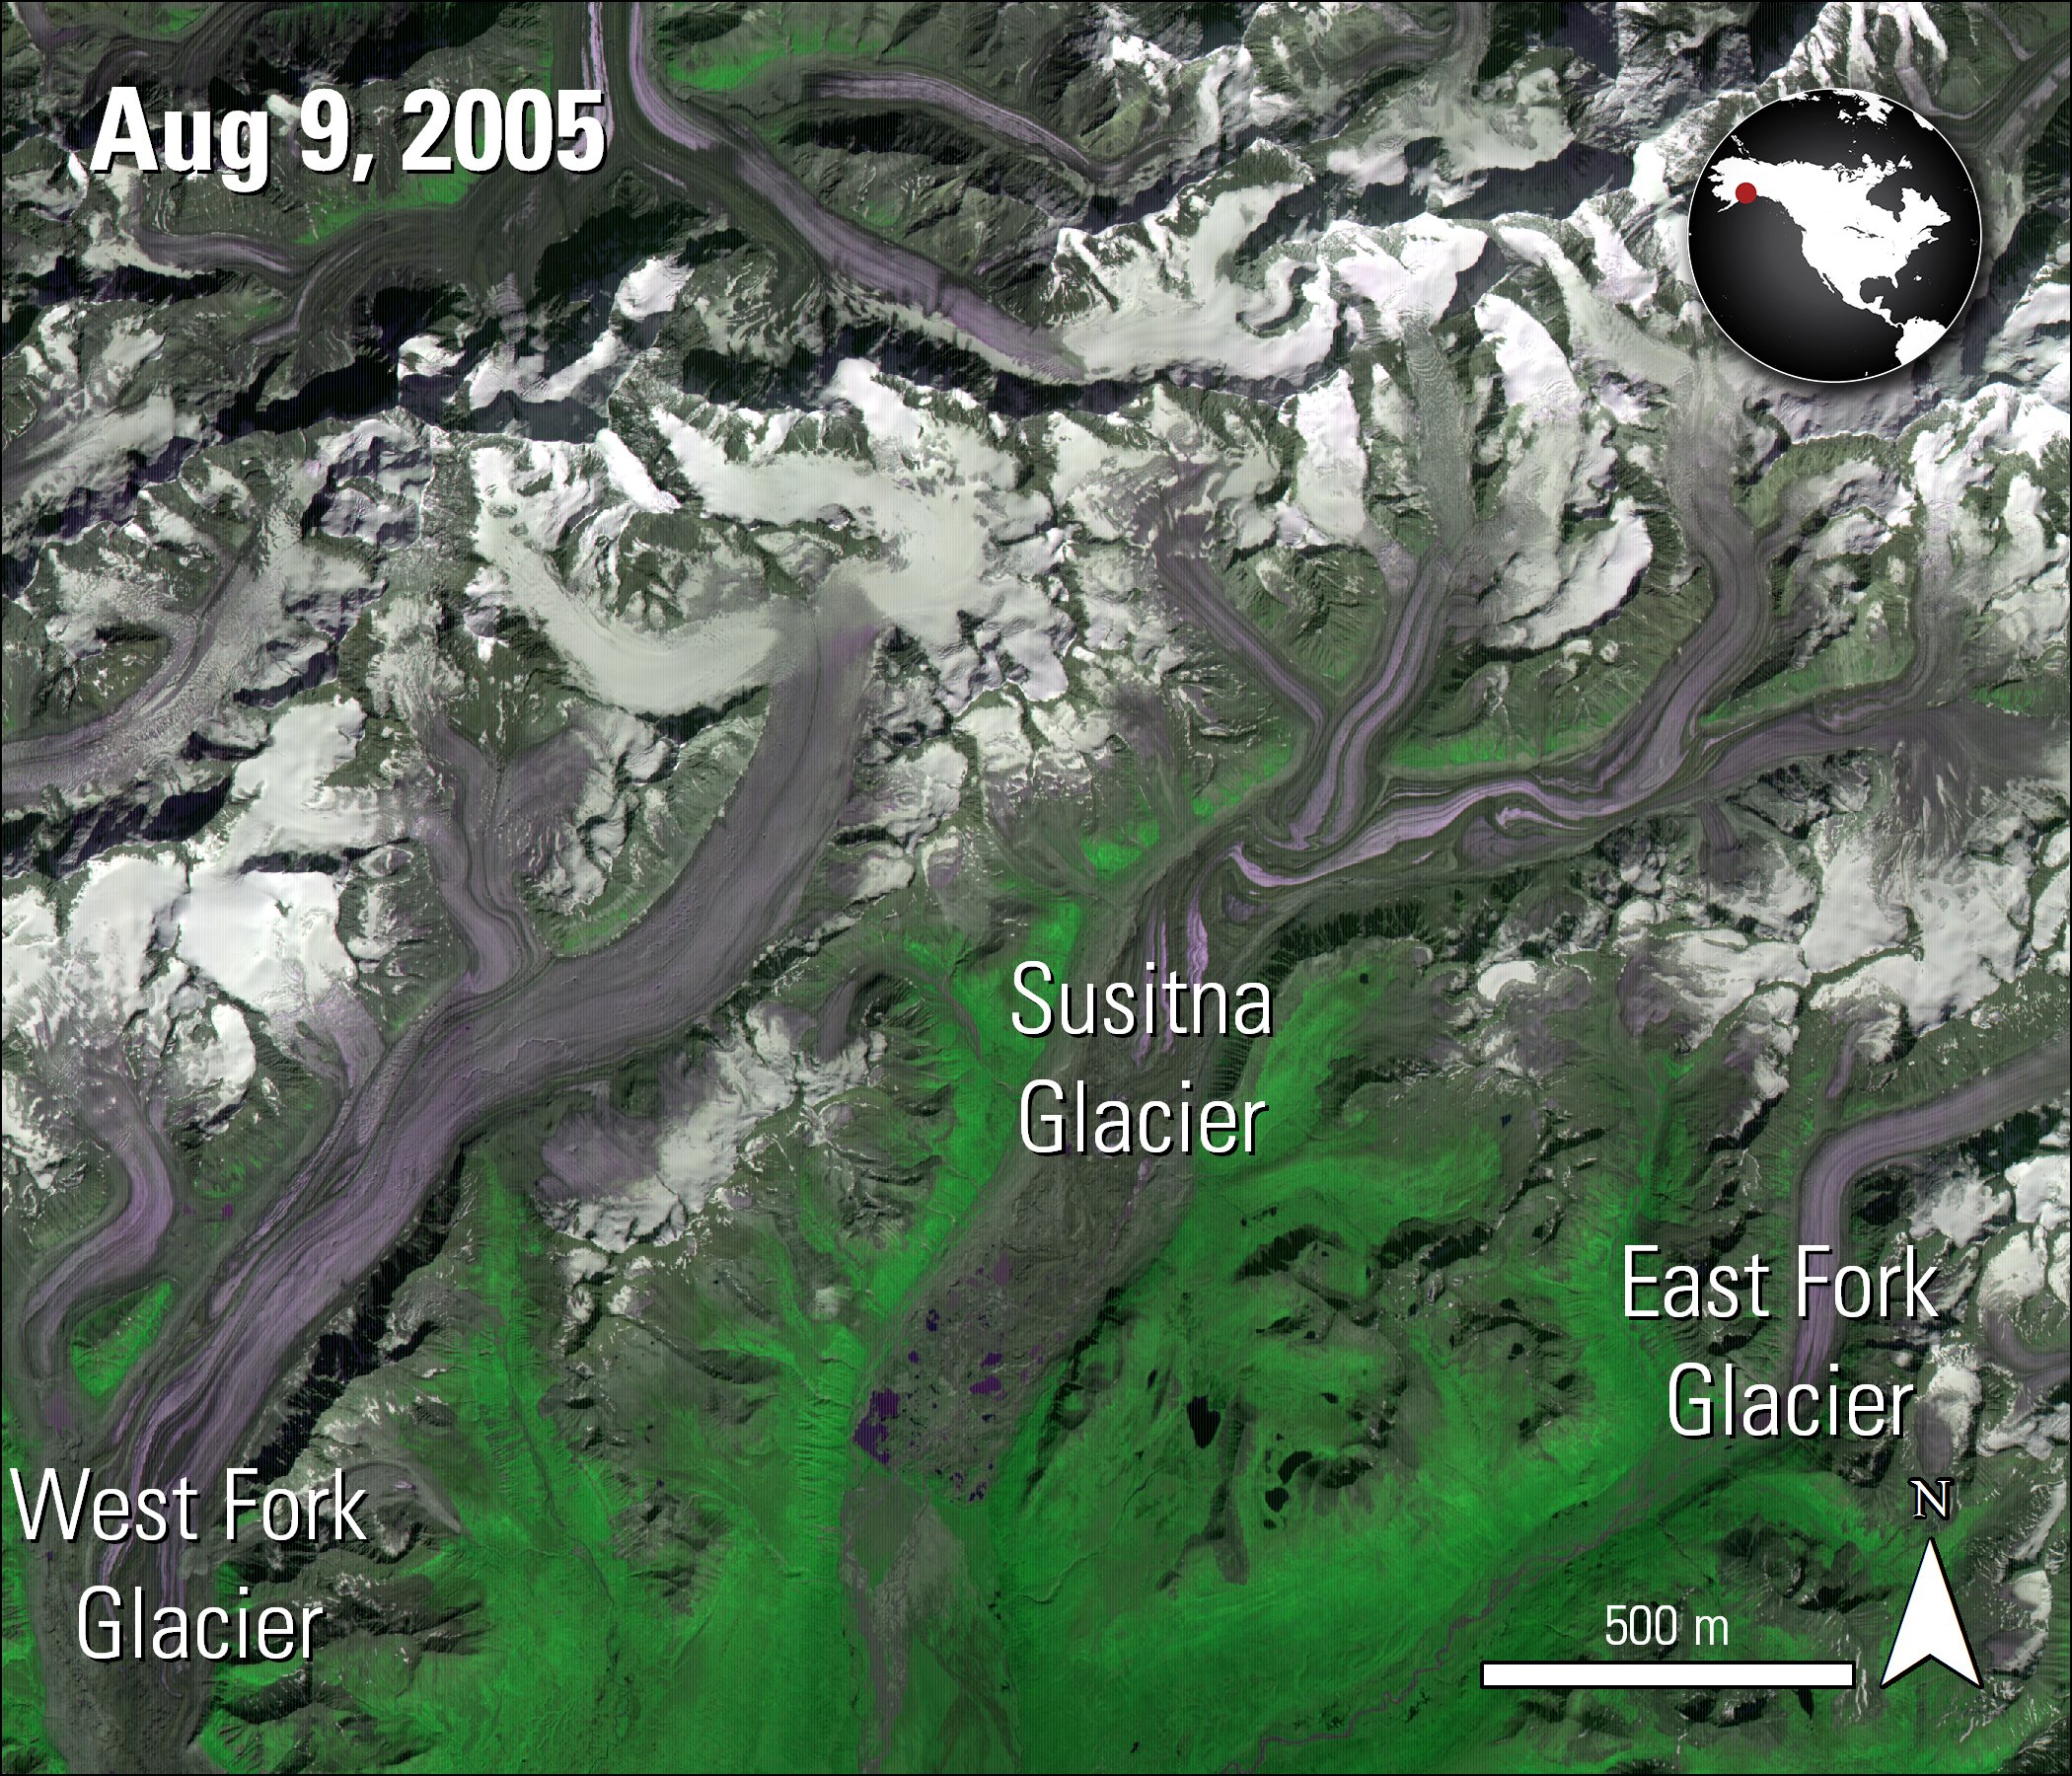 Terra ASTER imagery over glaciers in Alaska, acquired August 9, 2005.